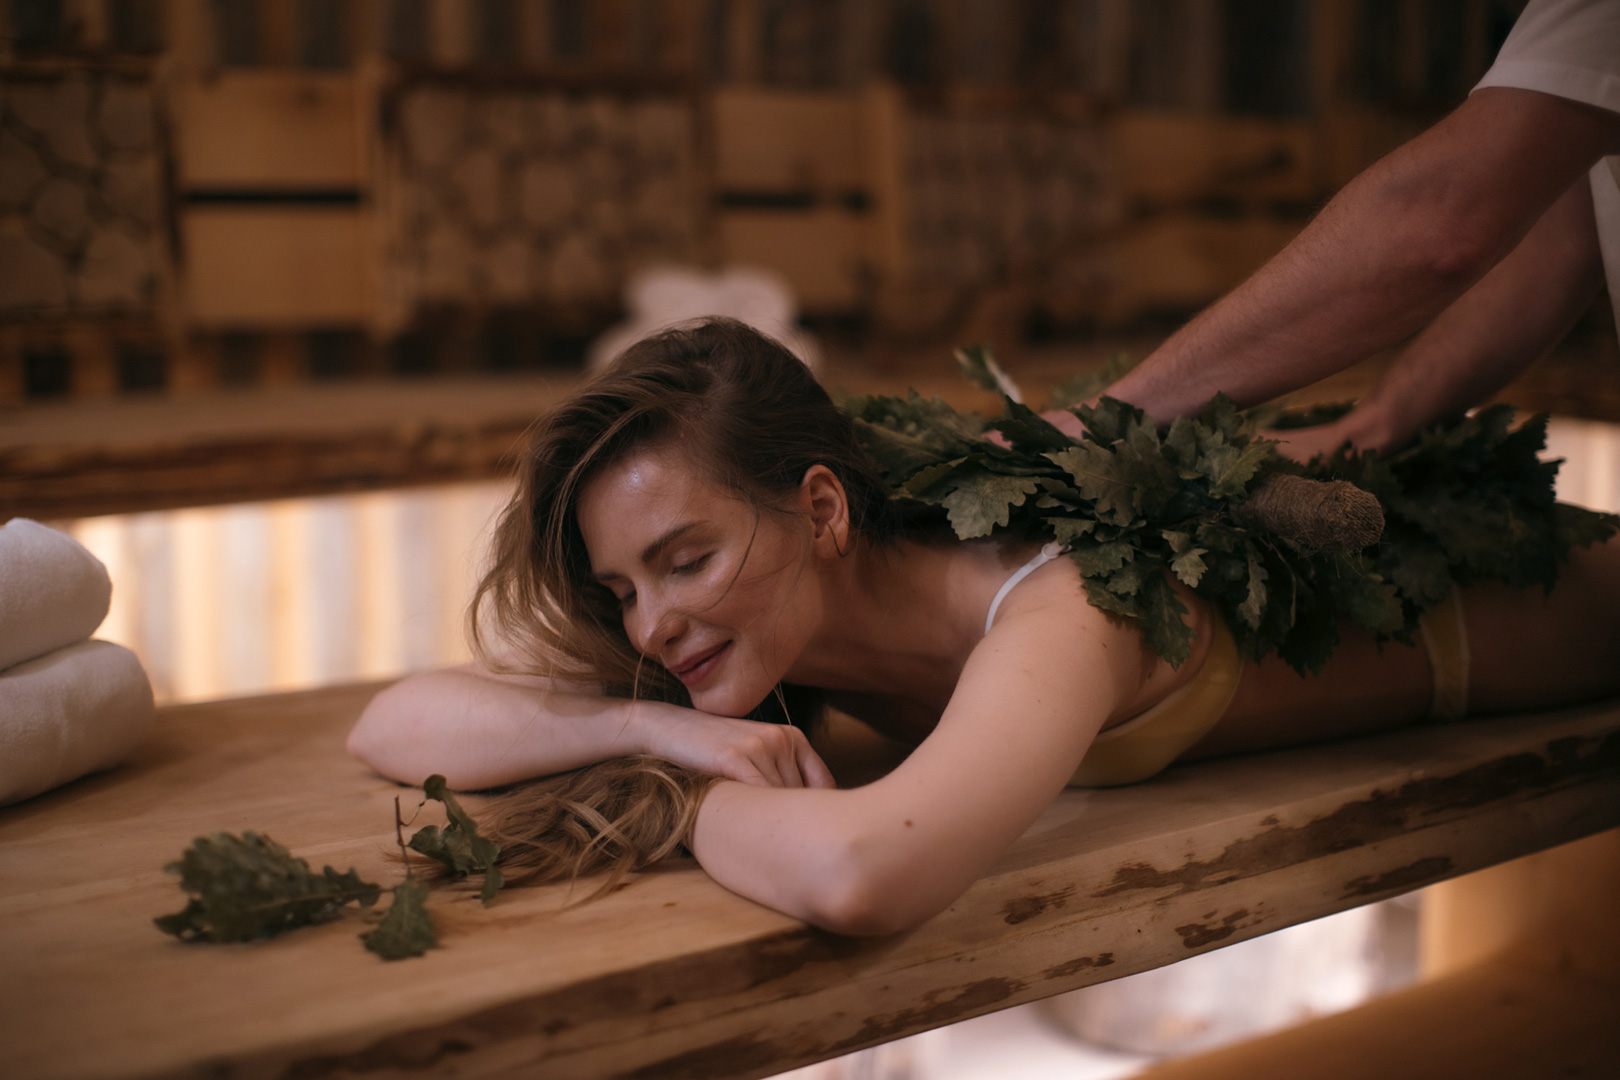 A person is lying face down on a wooden bench in a sauna, looking relaxed and serene. They are receiving a traditional sauna treatment with leafy branches being gently brushed along their back by another individual